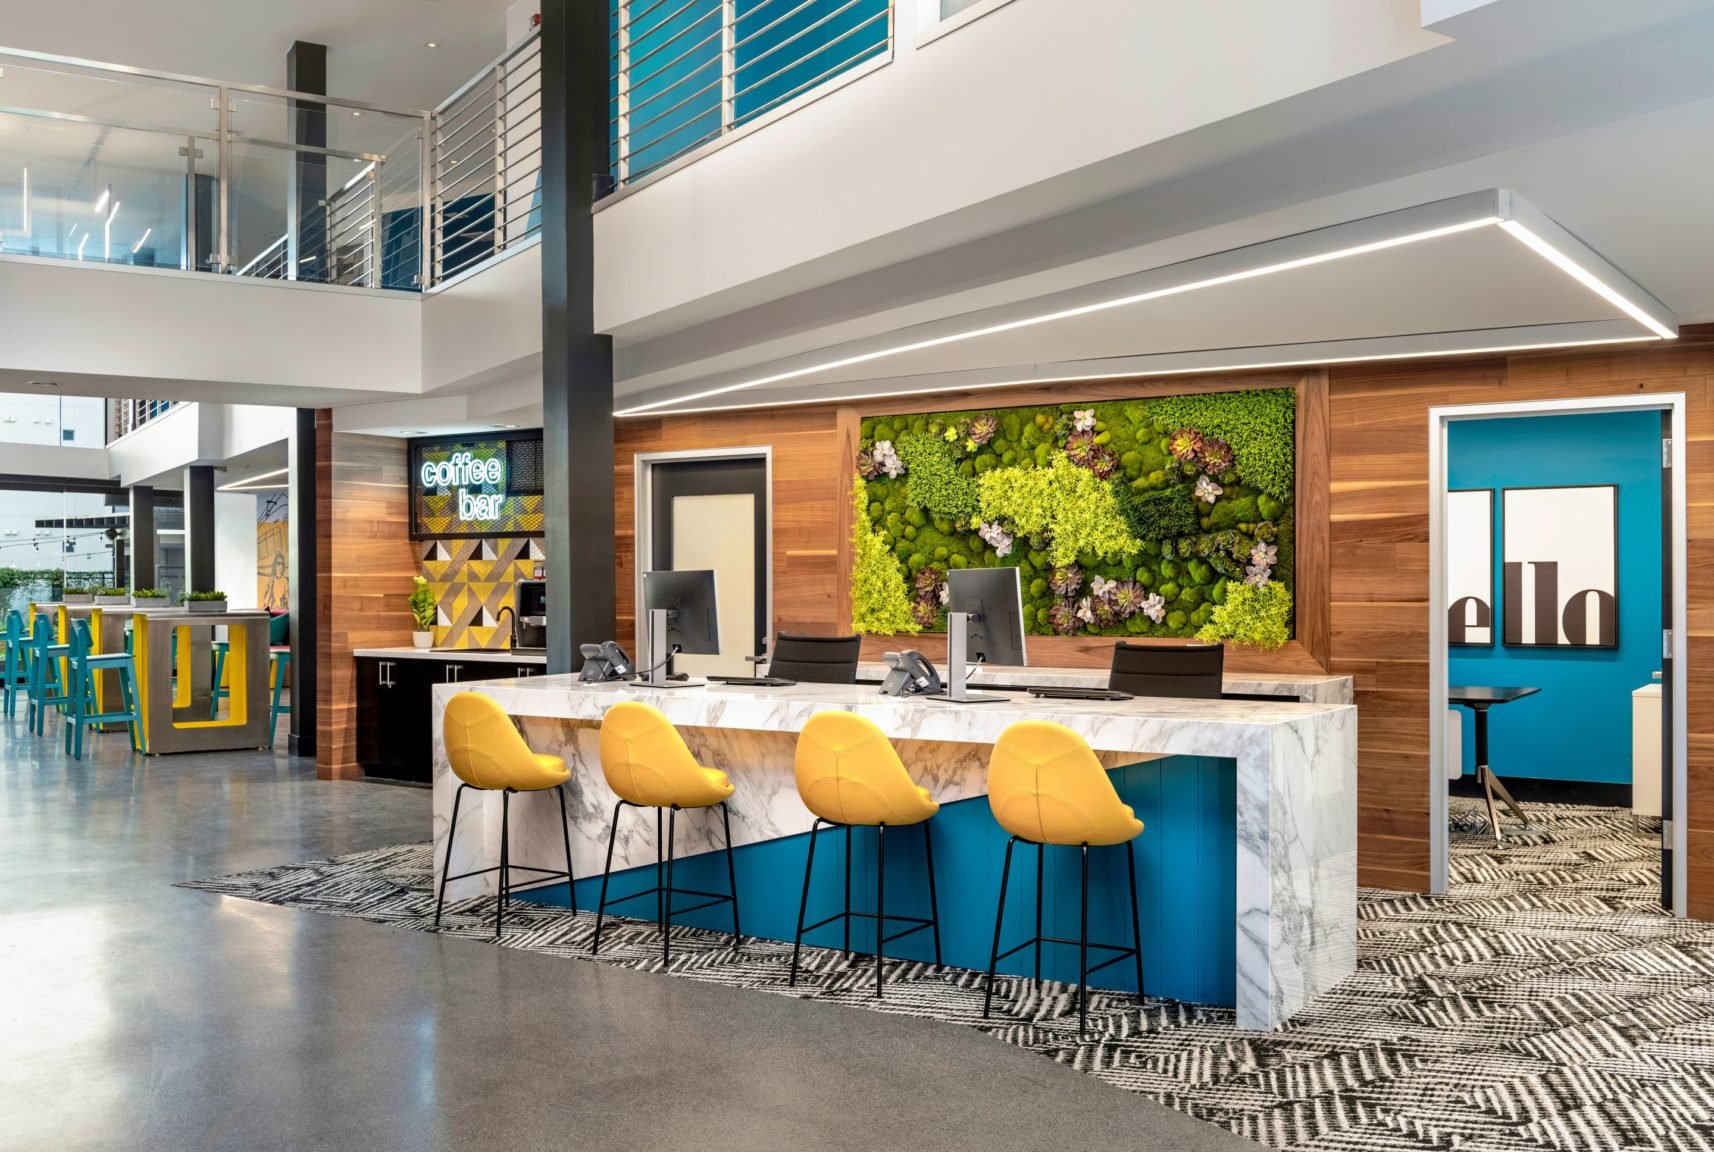 Love That Design - Ten01 at the Lake Apartments, Tempe - 01